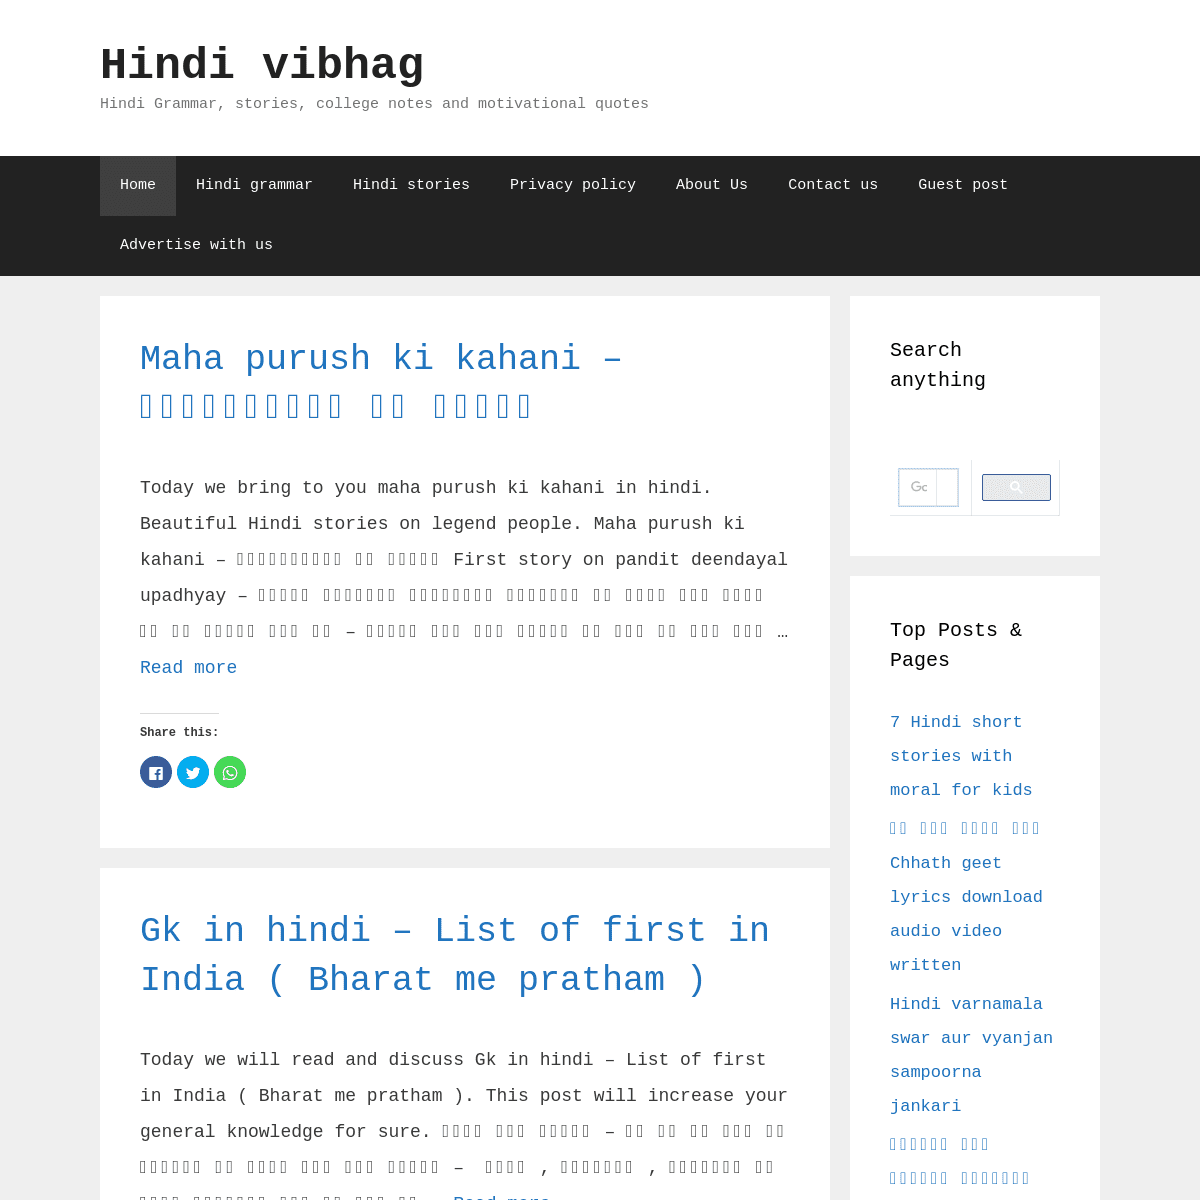 A complete backup of hindivibhag.com